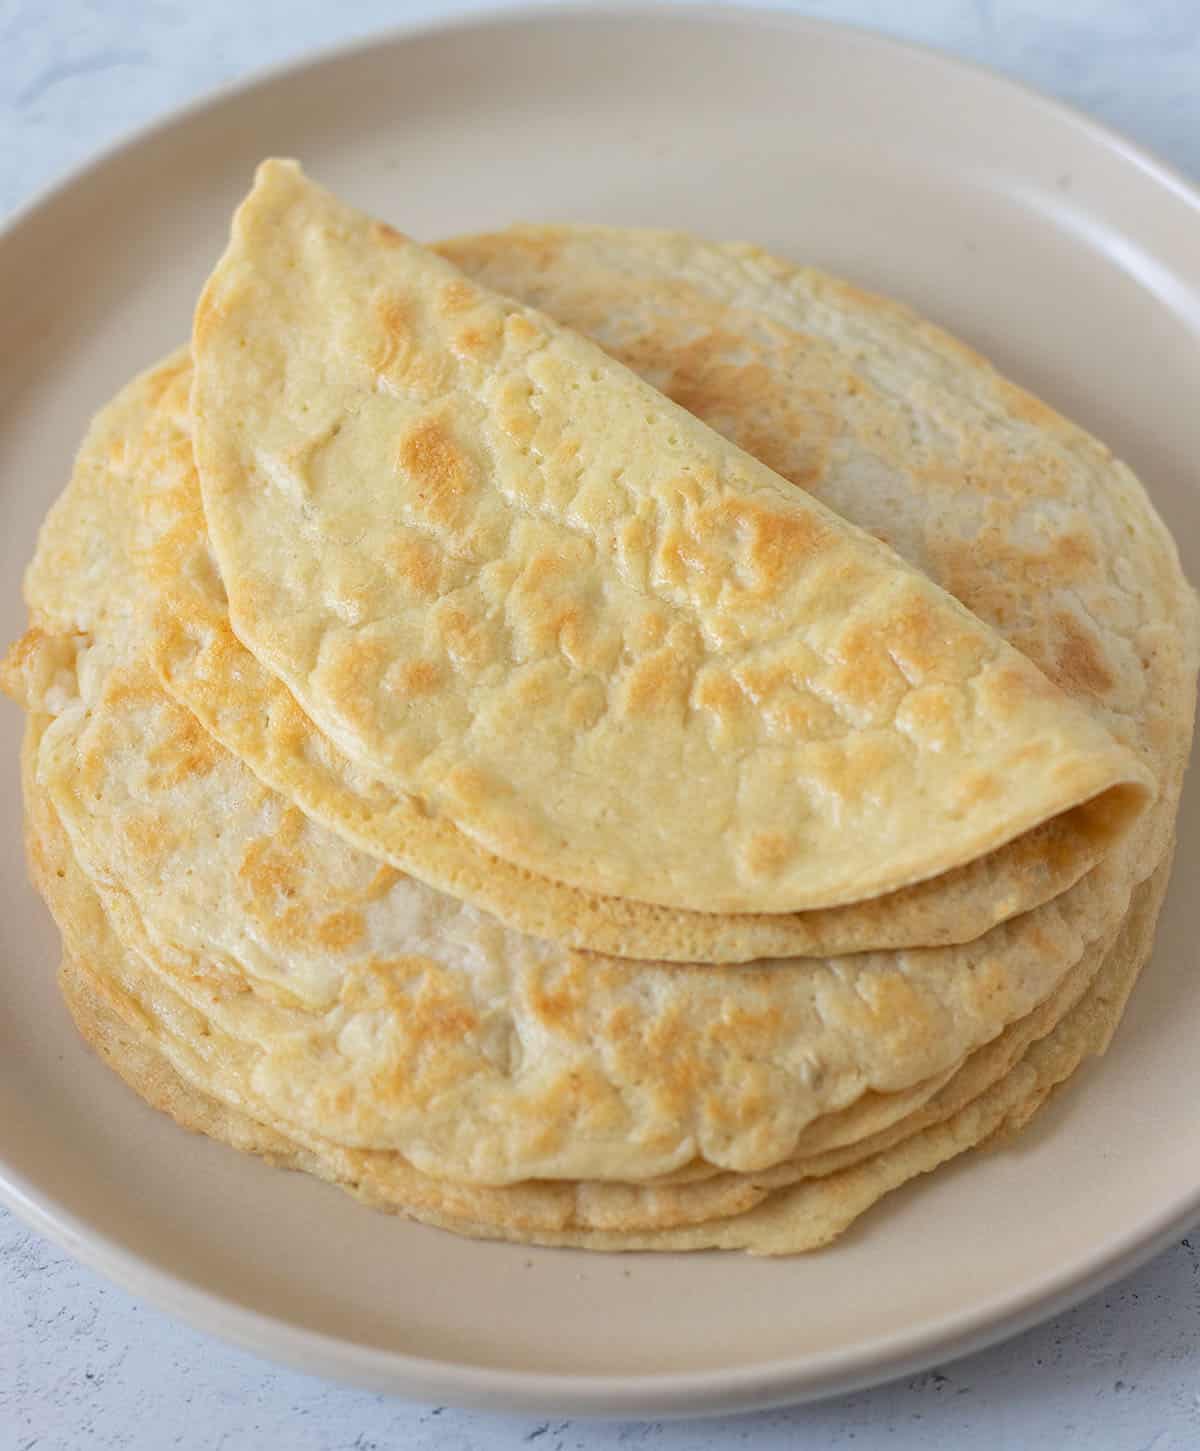 almond flour tortillas stack on a beige plate with the one on top folded over.